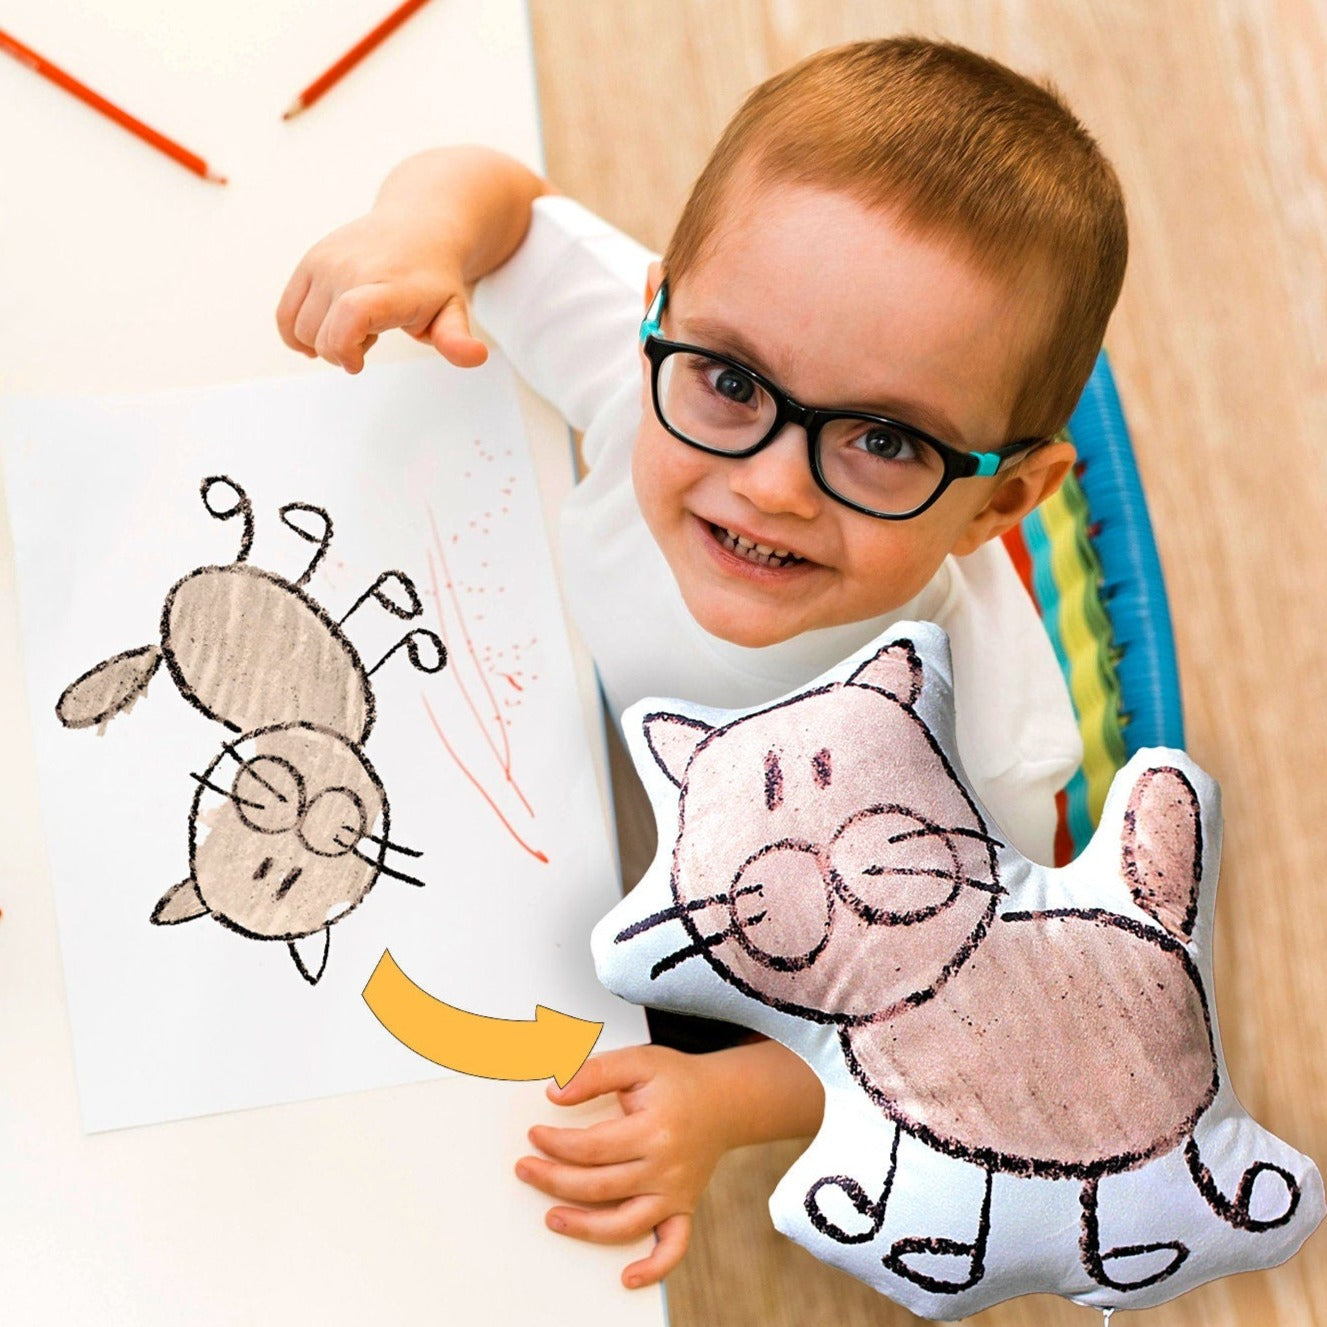 Turn Drawing into Pillows